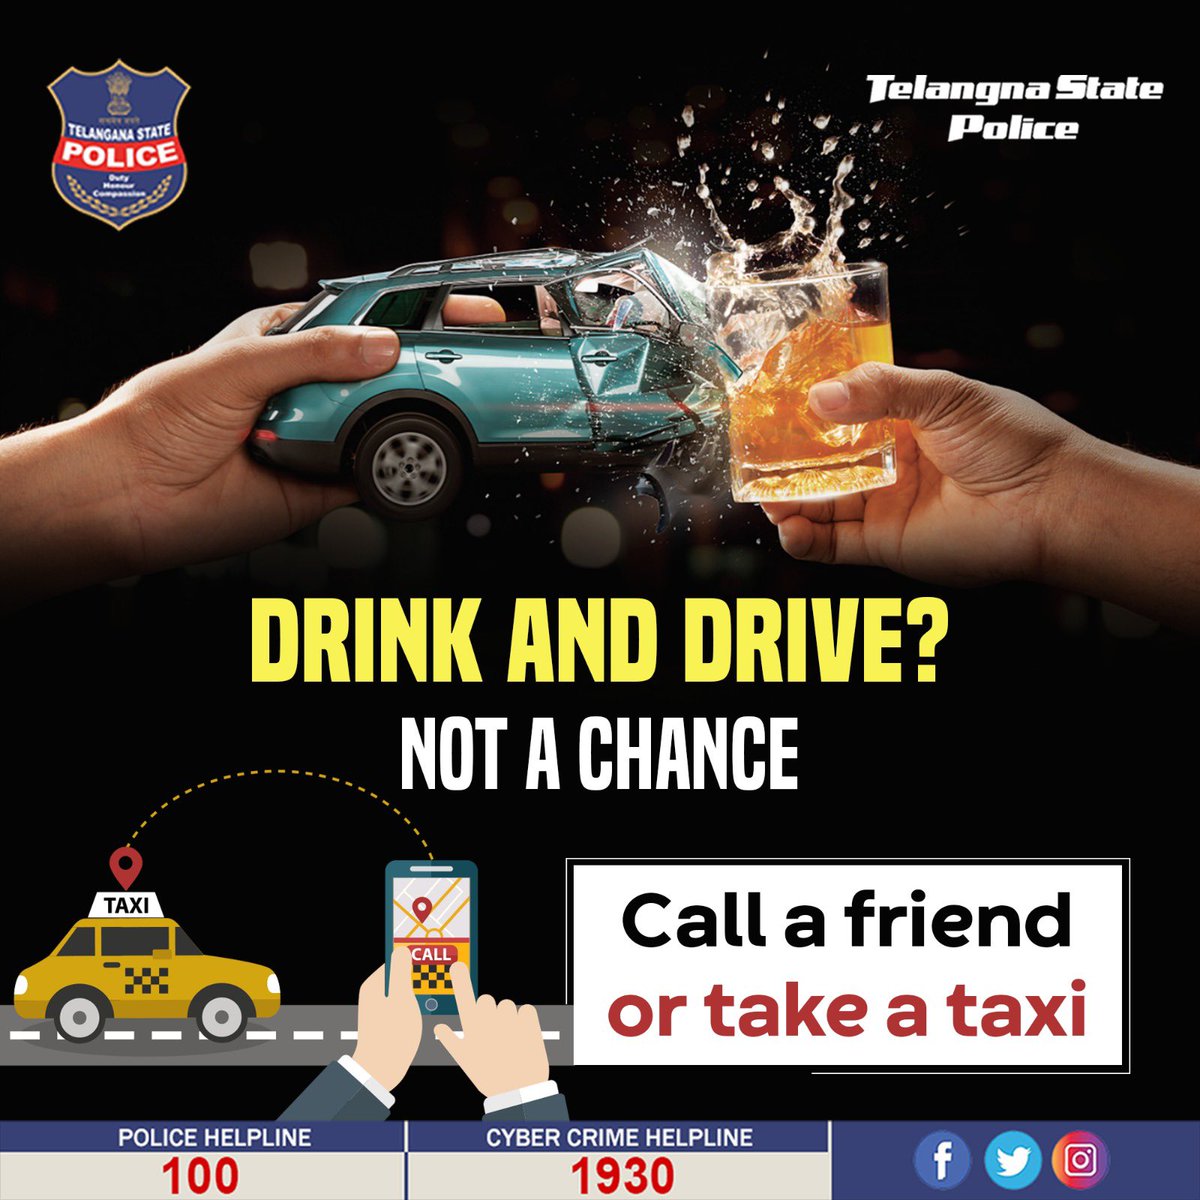 Drinking and driving not only leads to fines but also serious consequences.
 
#SayNoToDrinkAndDrive #DrinkAndDrive #DrunkAndDrive #TelanganaPolice